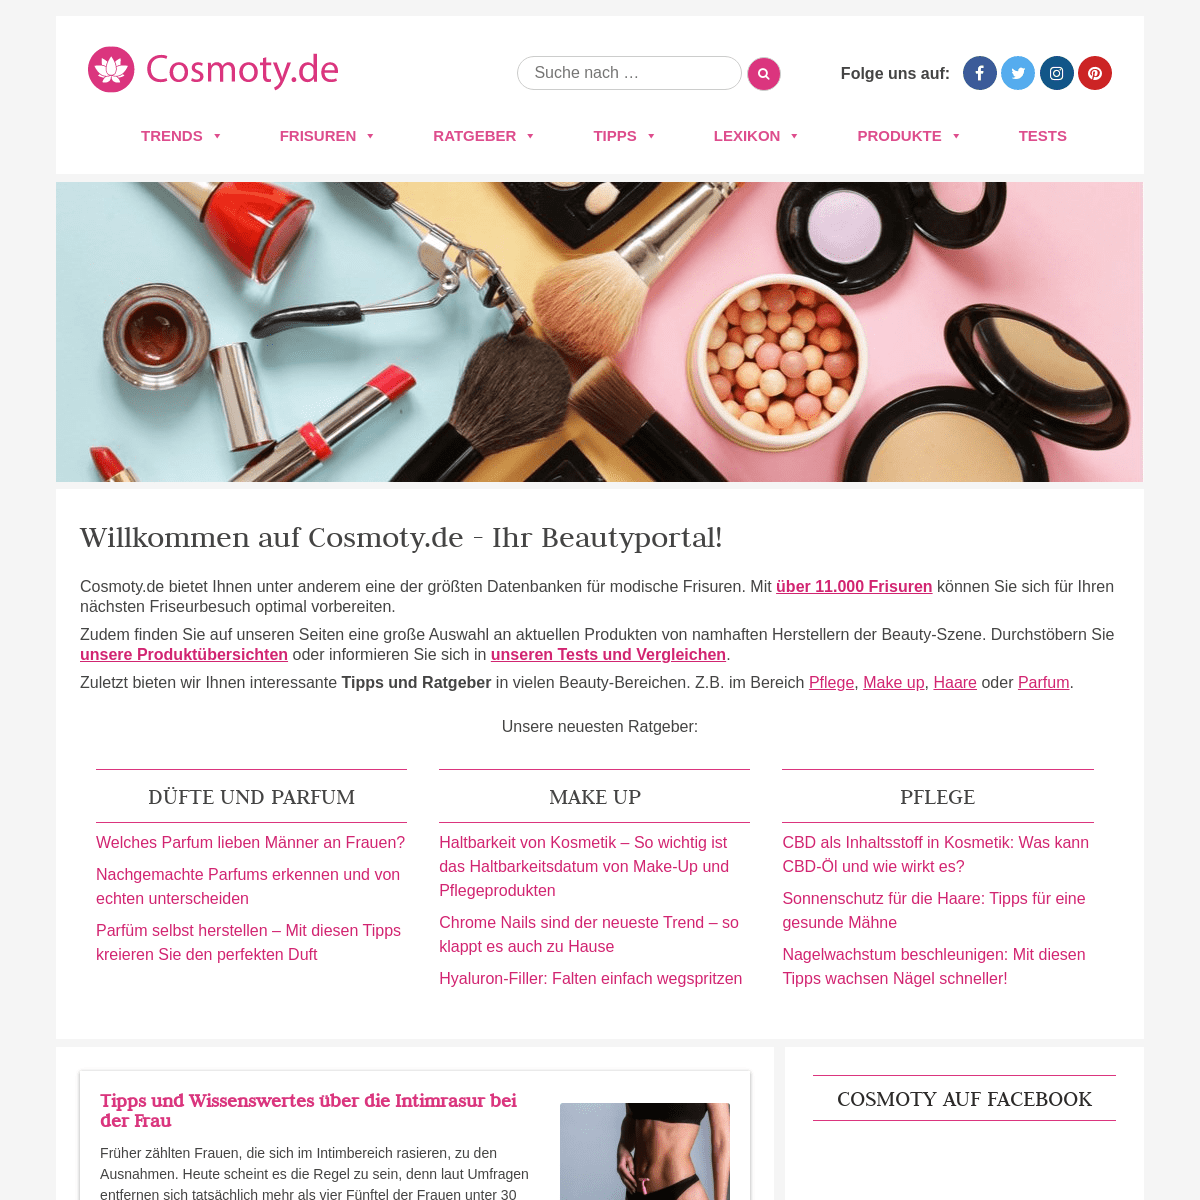 A complete backup of https://cosmoty.de